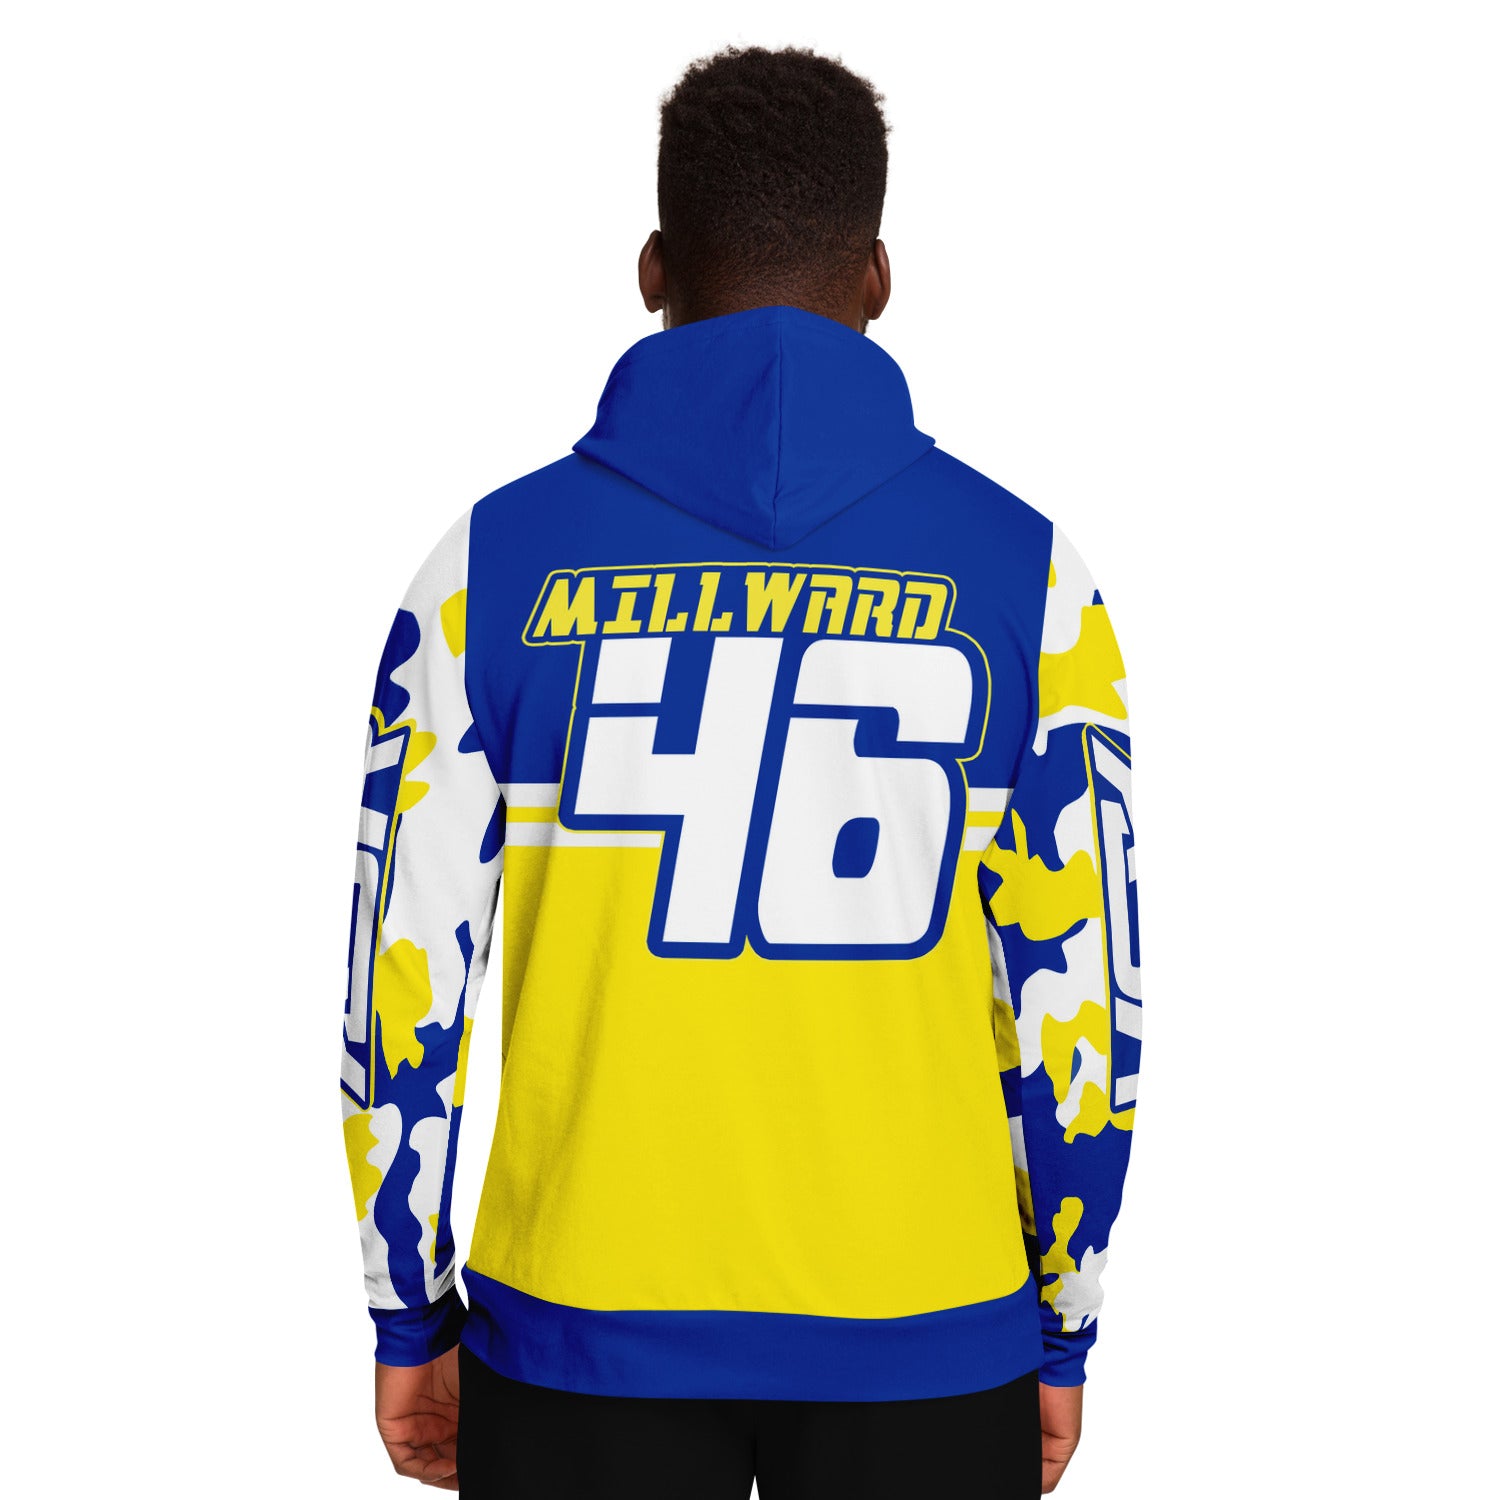 ASR Yellow / Blue Camo Sleeved Hoodie FREE Name & Number